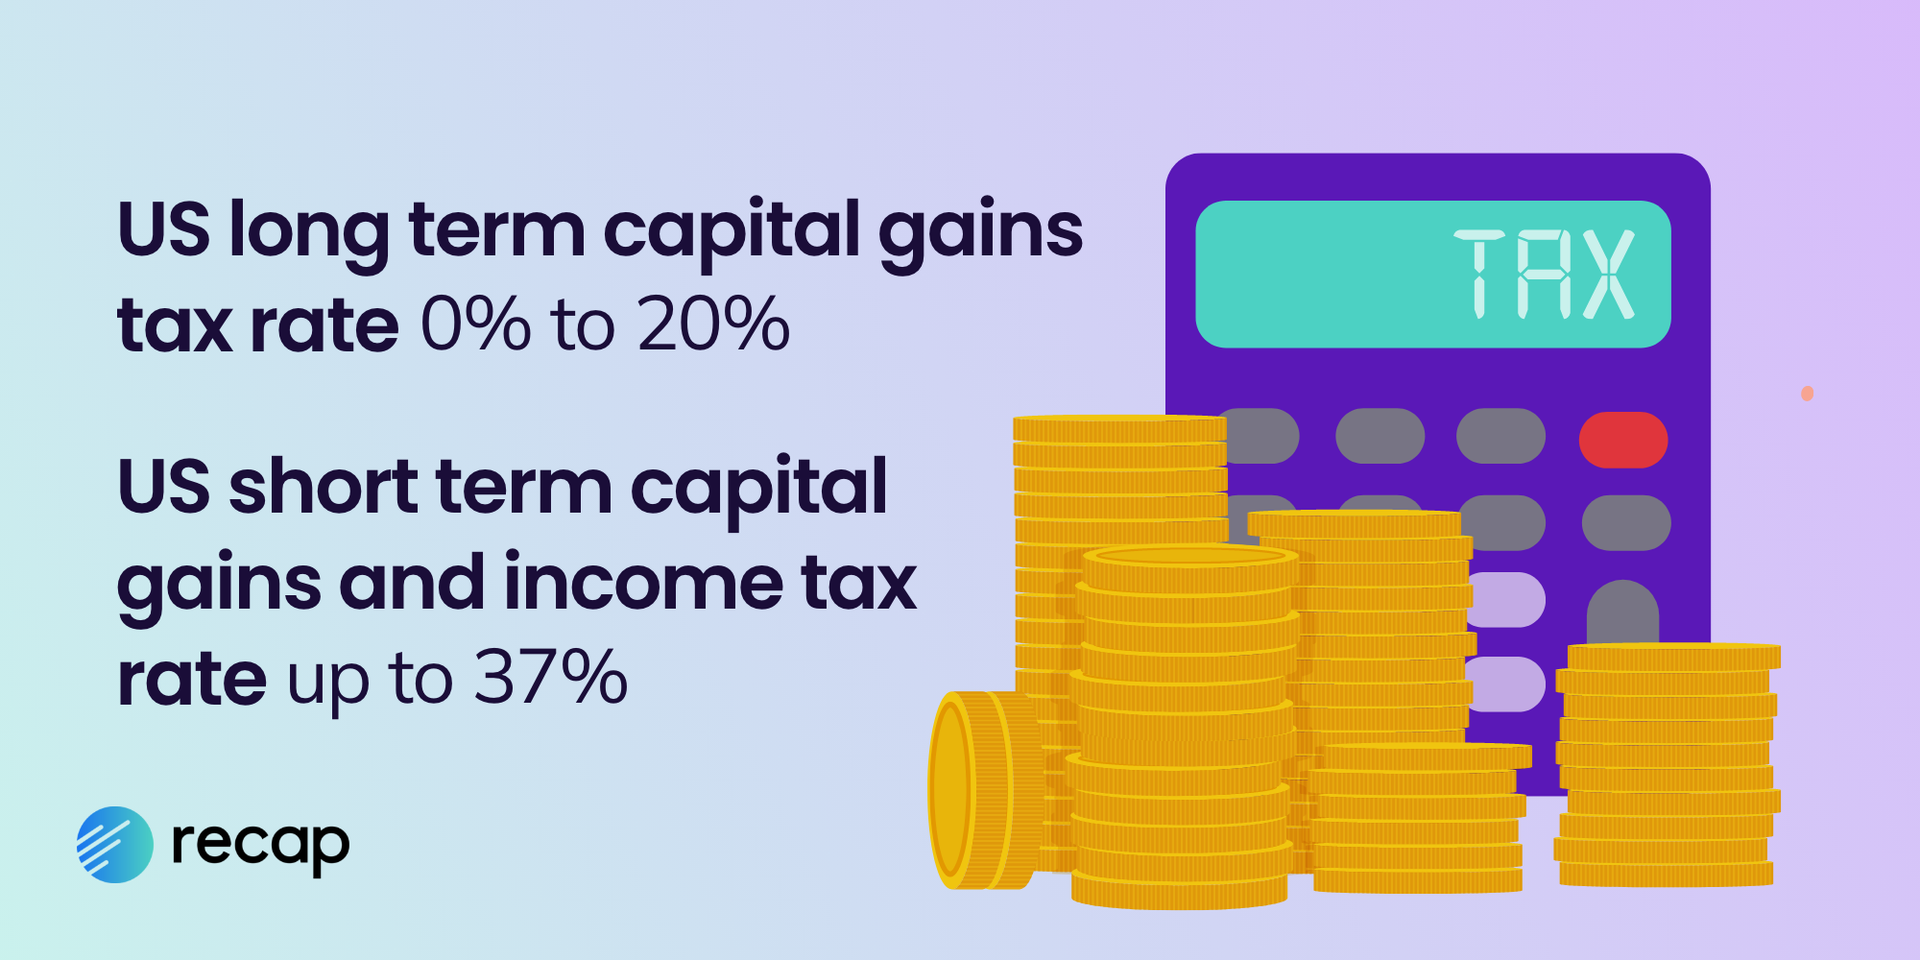 Infographic showing that US long term capital gains are taxed at a rate of 0% to 20%, wheras short term gains and income can be taxed at a rate of up to 37%